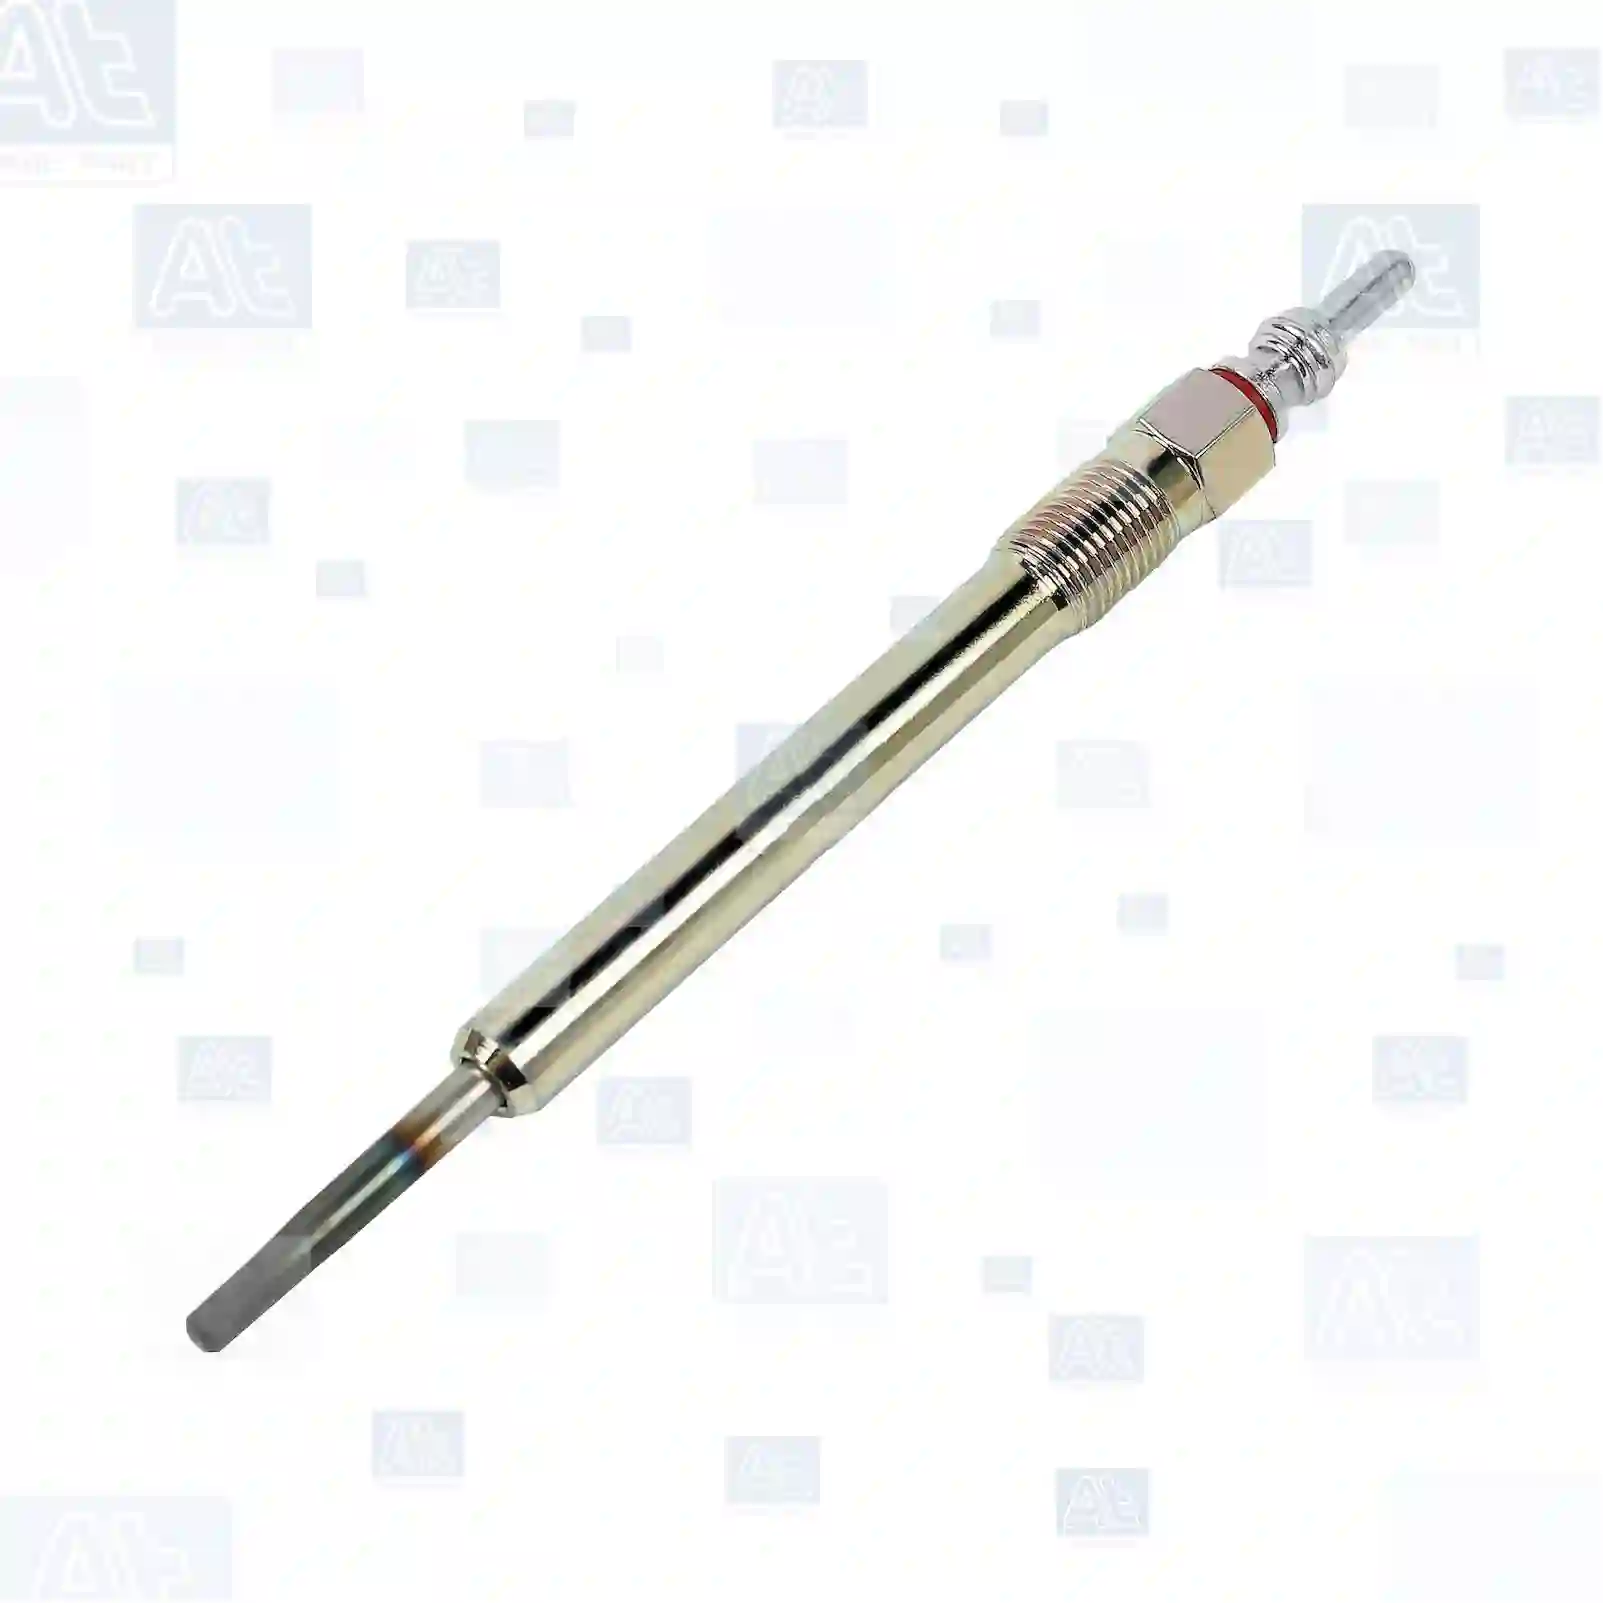 Glow plug, at no 77703548, oem no: 03L963319, 03L963319A, 03L963319B, 03L963319C, 03L963319D, 059963319E, 059963319F, 059963319J, 059963319M, 059998319, 32017516, 65268030001, 65268030002, 32017516, 95517032090, 95817032090, 95817032091, 9A796331900, 03L963319, 03L963319A, 03L963319B, 03L963319C, 03L963319D, 059963319E, 059963319F, 059963319J, 059963319M, 03L963319, 03L963319A, 03L963319B, 03L963319C, 03L963319D, 059963319E, 059963319F, 059963319J, 059963319M, 03L963319, 03L963319A, 03L963319B, 03L963319C, 03L963319D, 059963319C, 059963319E, 059963319F, 059963319J, 059963319M, 059963319S, 059963319T, 059998319, ZG20445-0008 At Spare Part | Engine, Accelerator Pedal, Camshaft, Connecting Rod, Crankcase, Crankshaft, Cylinder Head, Engine Suspension Mountings, Exhaust Manifold, Exhaust Gas Recirculation, Filter Kits, Flywheel Housing, General Overhaul Kits, Engine, Intake Manifold, Oil Cleaner, Oil Cooler, Oil Filter, Oil Pump, Oil Sump, Piston & Liner, Sensor & Switch, Timing Case, Turbocharger, Cooling System, Belt Tensioner, Coolant Filter, Coolant Pipe, Corrosion Prevention Agent, Drive, Expansion Tank, Fan, Intercooler, Monitors & Gauges, Radiator, Thermostat, V-Belt / Timing belt, Water Pump, Fuel System, Electronical Injector Unit, Feed Pump, Fuel Filter, cpl., Fuel Gauge Sender,  Fuel Line, Fuel Pump, Fuel Tank, Injection Line Kit, Injection Pump, Exhaust System, Clutch & Pedal, Gearbox, Propeller Shaft, Axles, Brake System, Hubs & Wheels, Suspension, Leaf Spring, Universal Parts / Accessories, Steering, Electrical System, Cabin Glow plug, at no 77703548, oem no: 03L963319, 03L963319A, 03L963319B, 03L963319C, 03L963319D, 059963319E, 059963319F, 059963319J, 059963319M, 059998319, 32017516, 65268030001, 65268030002, 32017516, 95517032090, 95817032090, 95817032091, 9A796331900, 03L963319, 03L963319A, 03L963319B, 03L963319C, 03L963319D, 059963319E, 059963319F, 059963319J, 059963319M, 03L963319, 03L963319A, 03L963319B, 03L963319C, 03L963319D, 059963319E, 059963319F, 059963319J, 059963319M, 03L963319, 03L963319A, 03L963319B, 03L963319C, 03L963319D, 059963319C, 059963319E, 059963319F, 059963319J, 059963319M, 059963319S, 059963319T, 059998319, ZG20445-0008 At Spare Part | Engine, Accelerator Pedal, Camshaft, Connecting Rod, Crankcase, Crankshaft, Cylinder Head, Engine Suspension Mountings, Exhaust Manifold, Exhaust Gas Recirculation, Filter Kits, Flywheel Housing, General Overhaul Kits, Engine, Intake Manifold, Oil Cleaner, Oil Cooler, Oil Filter, Oil Pump, Oil Sump, Piston & Liner, Sensor & Switch, Timing Case, Turbocharger, Cooling System, Belt Tensioner, Coolant Filter, Coolant Pipe, Corrosion Prevention Agent, Drive, Expansion Tank, Fan, Intercooler, Monitors & Gauges, Radiator, Thermostat, V-Belt / Timing belt, Water Pump, Fuel System, Electronical Injector Unit, Feed Pump, Fuel Filter, cpl., Fuel Gauge Sender,  Fuel Line, Fuel Pump, Fuel Tank, Injection Line Kit, Injection Pump, Exhaust System, Clutch & Pedal, Gearbox, Propeller Shaft, Axles, Brake System, Hubs & Wheels, Suspension, Leaf Spring, Universal Parts / Accessories, Steering, Electrical System, Cabin